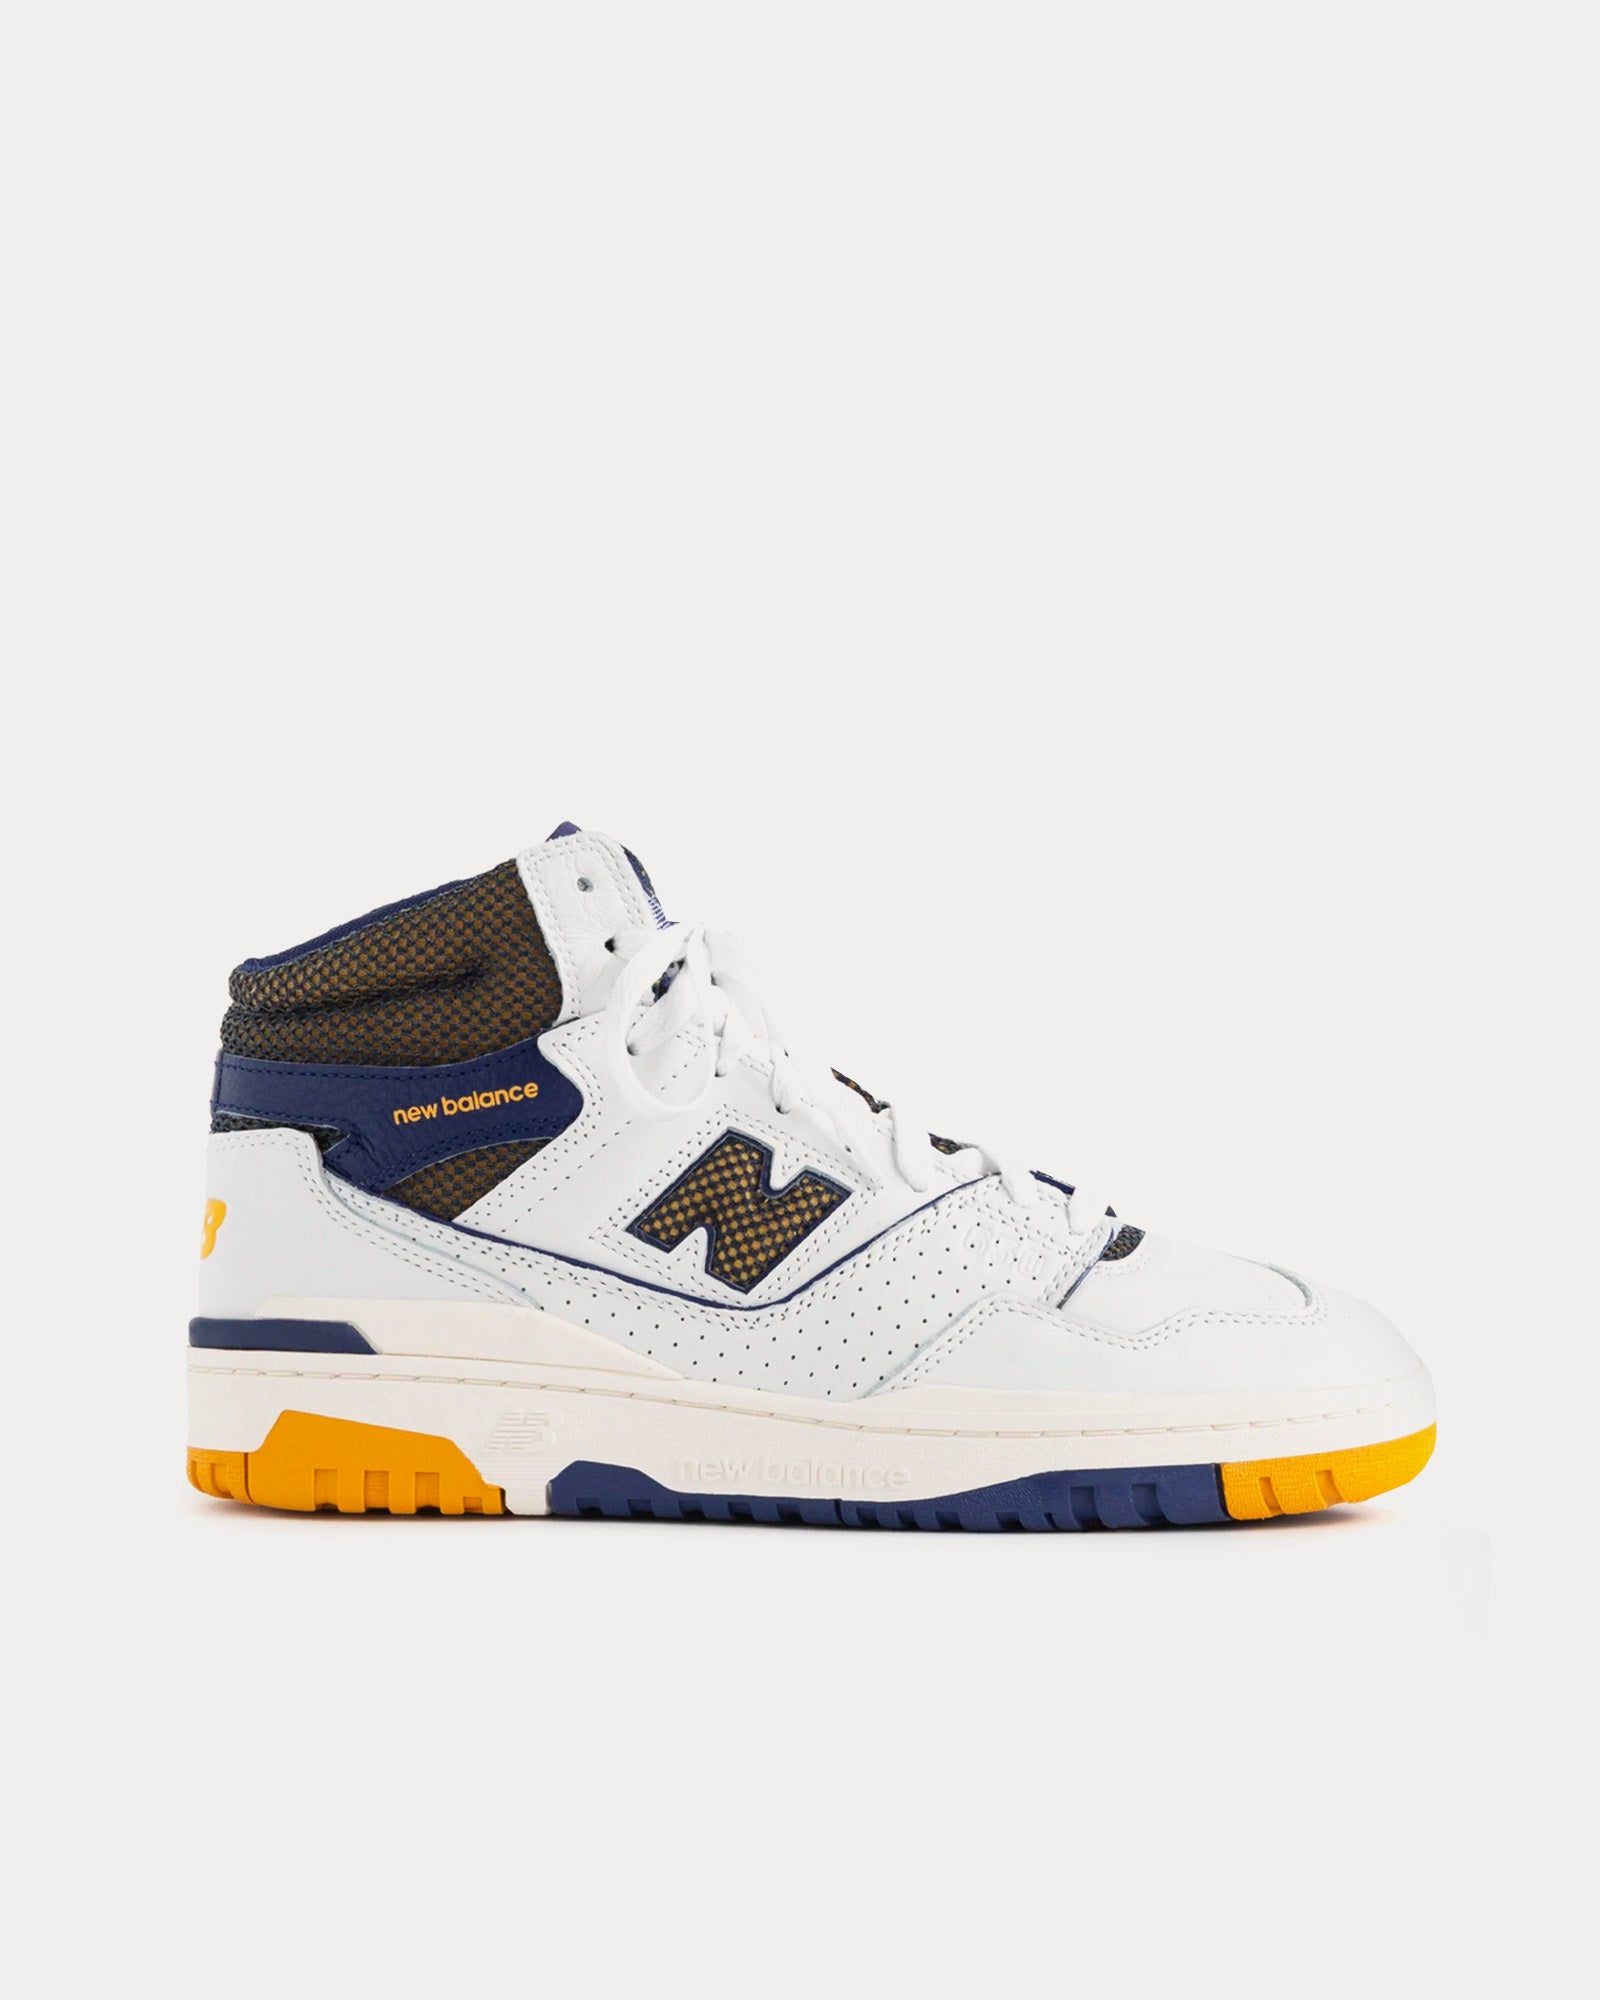 New Balance x Aime Leon Dore - 650r Leather White / Yellow High Top Sneakers